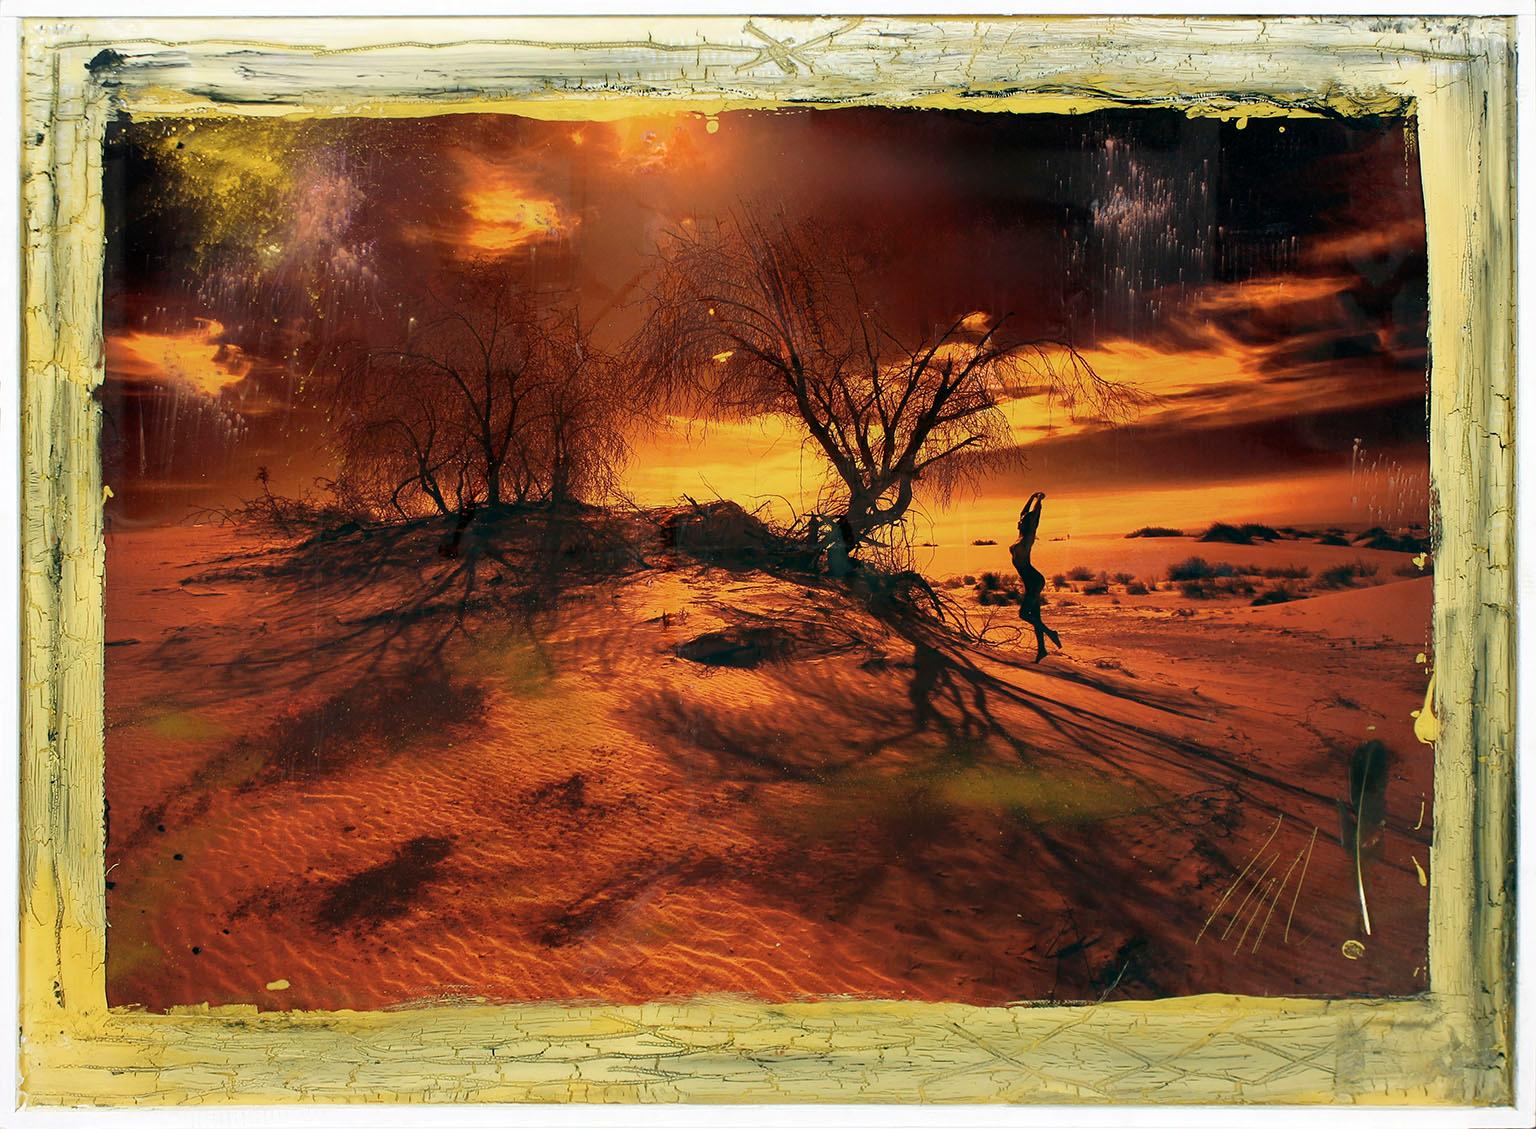 "Fire" archival print, oil paint and mixed media encased in resin by Mazzucco - Mixed Media Art by Raphael Mazzucco